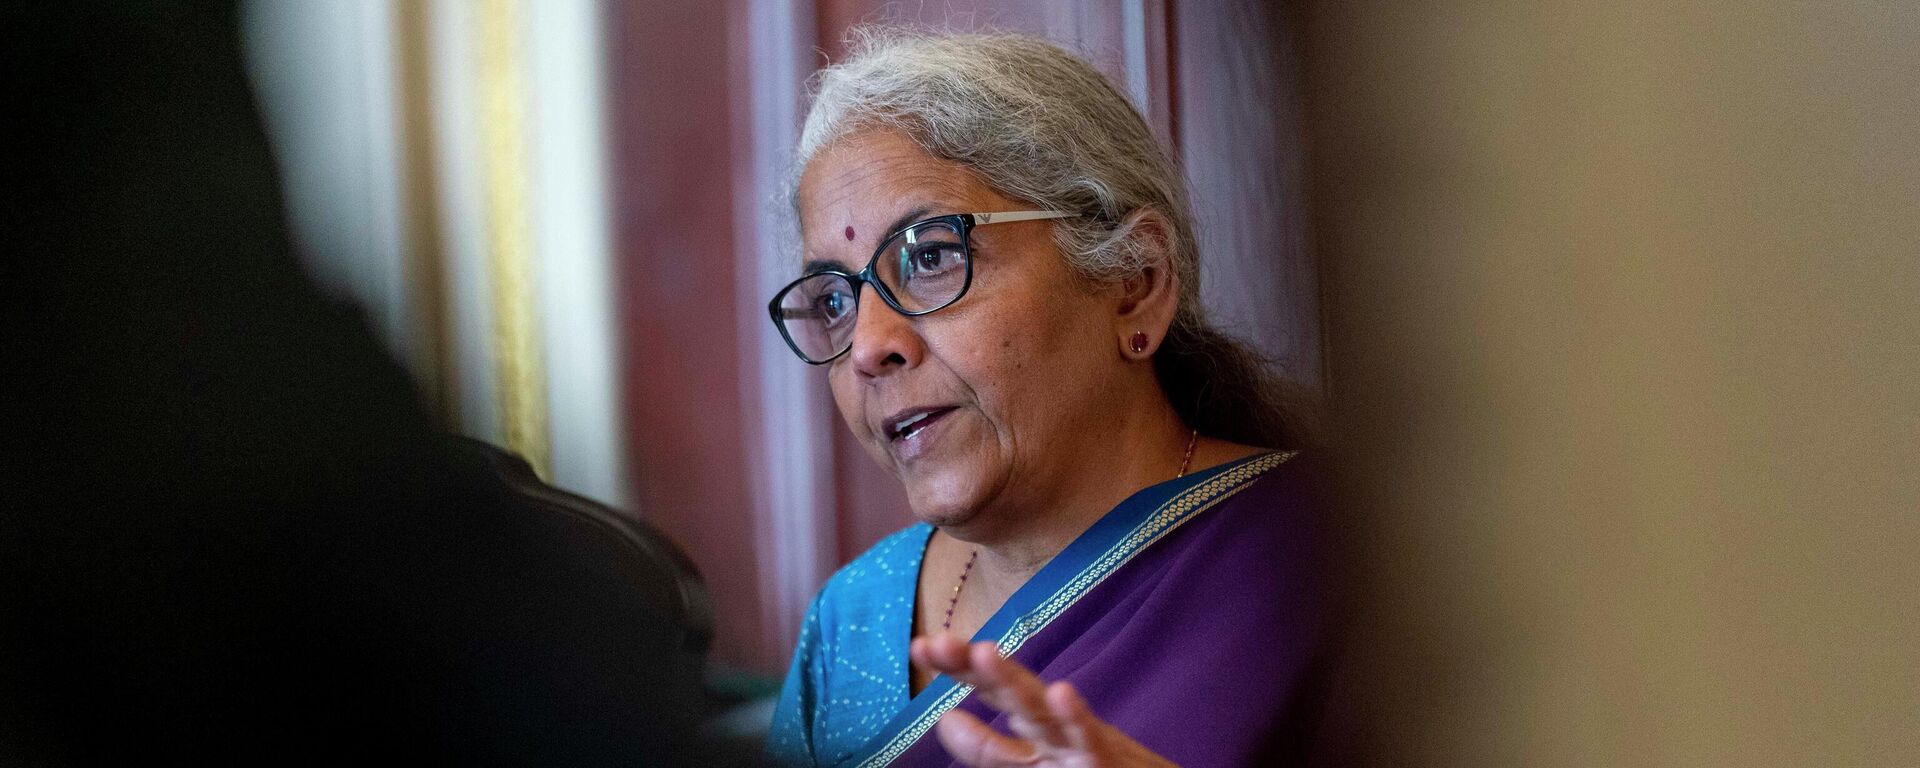 Finance Minister of India Nirmala Sitharaman speaks during a meeting with Treasury Secretary Janet Yellen at the Department of Treasury in Washington, Tuesday, Oct. 11, 2022. - Sputnik International, 1920, 12.10.2022